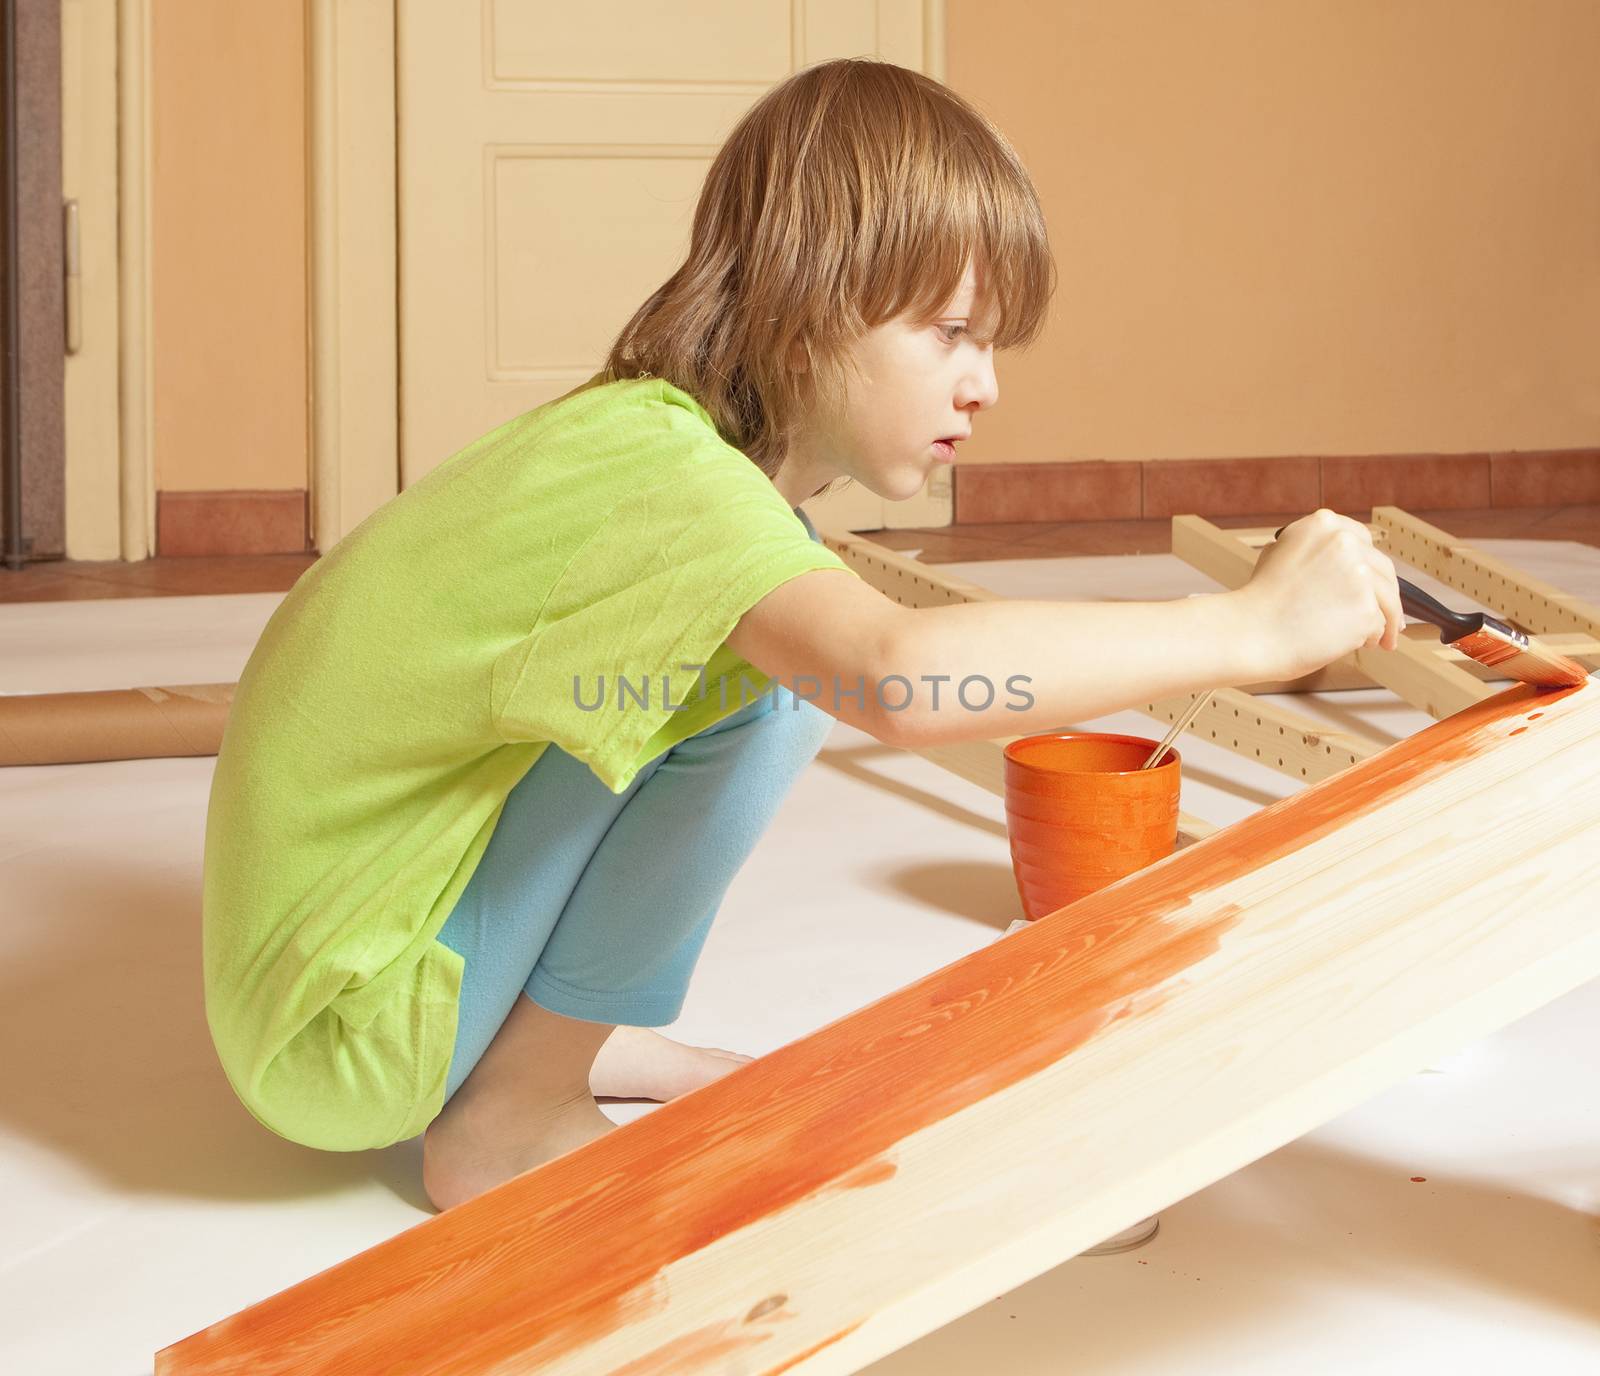 Boy with Blond Hair Painting a Board by courtyardpix